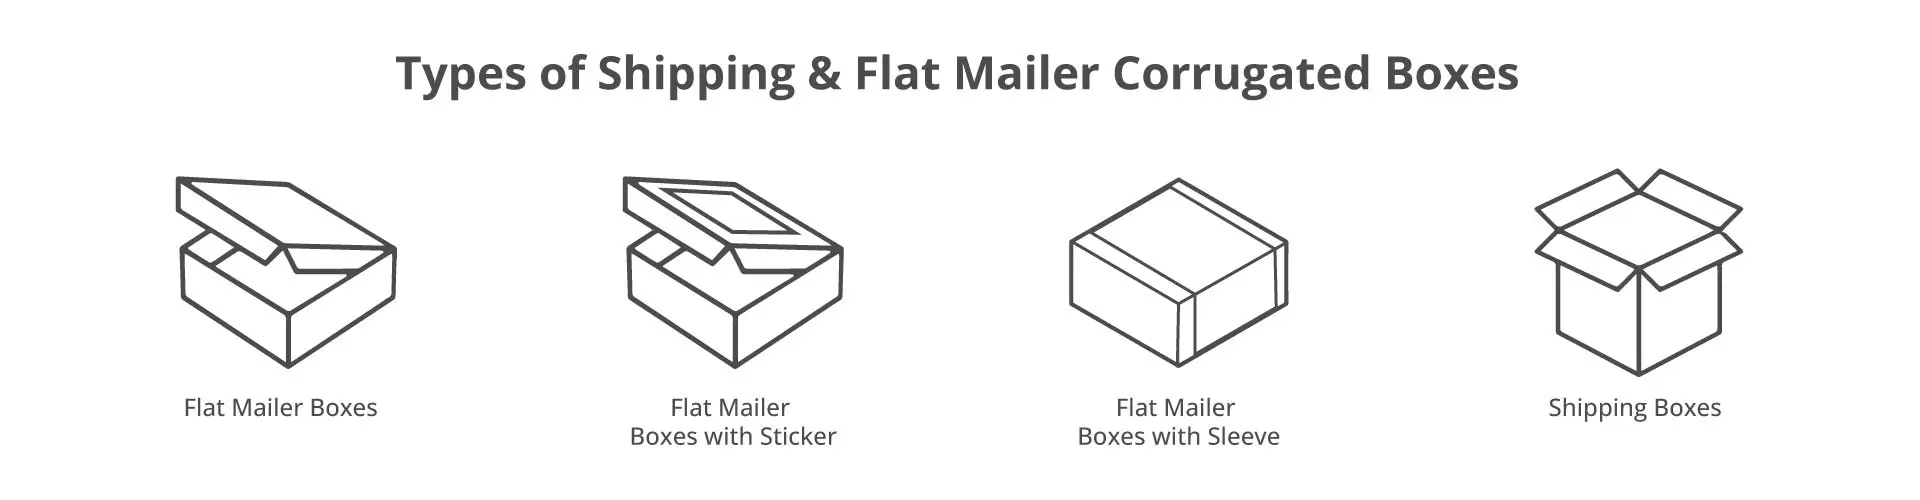 Types of Shipping & Flat Mailer Corrugated Boxes